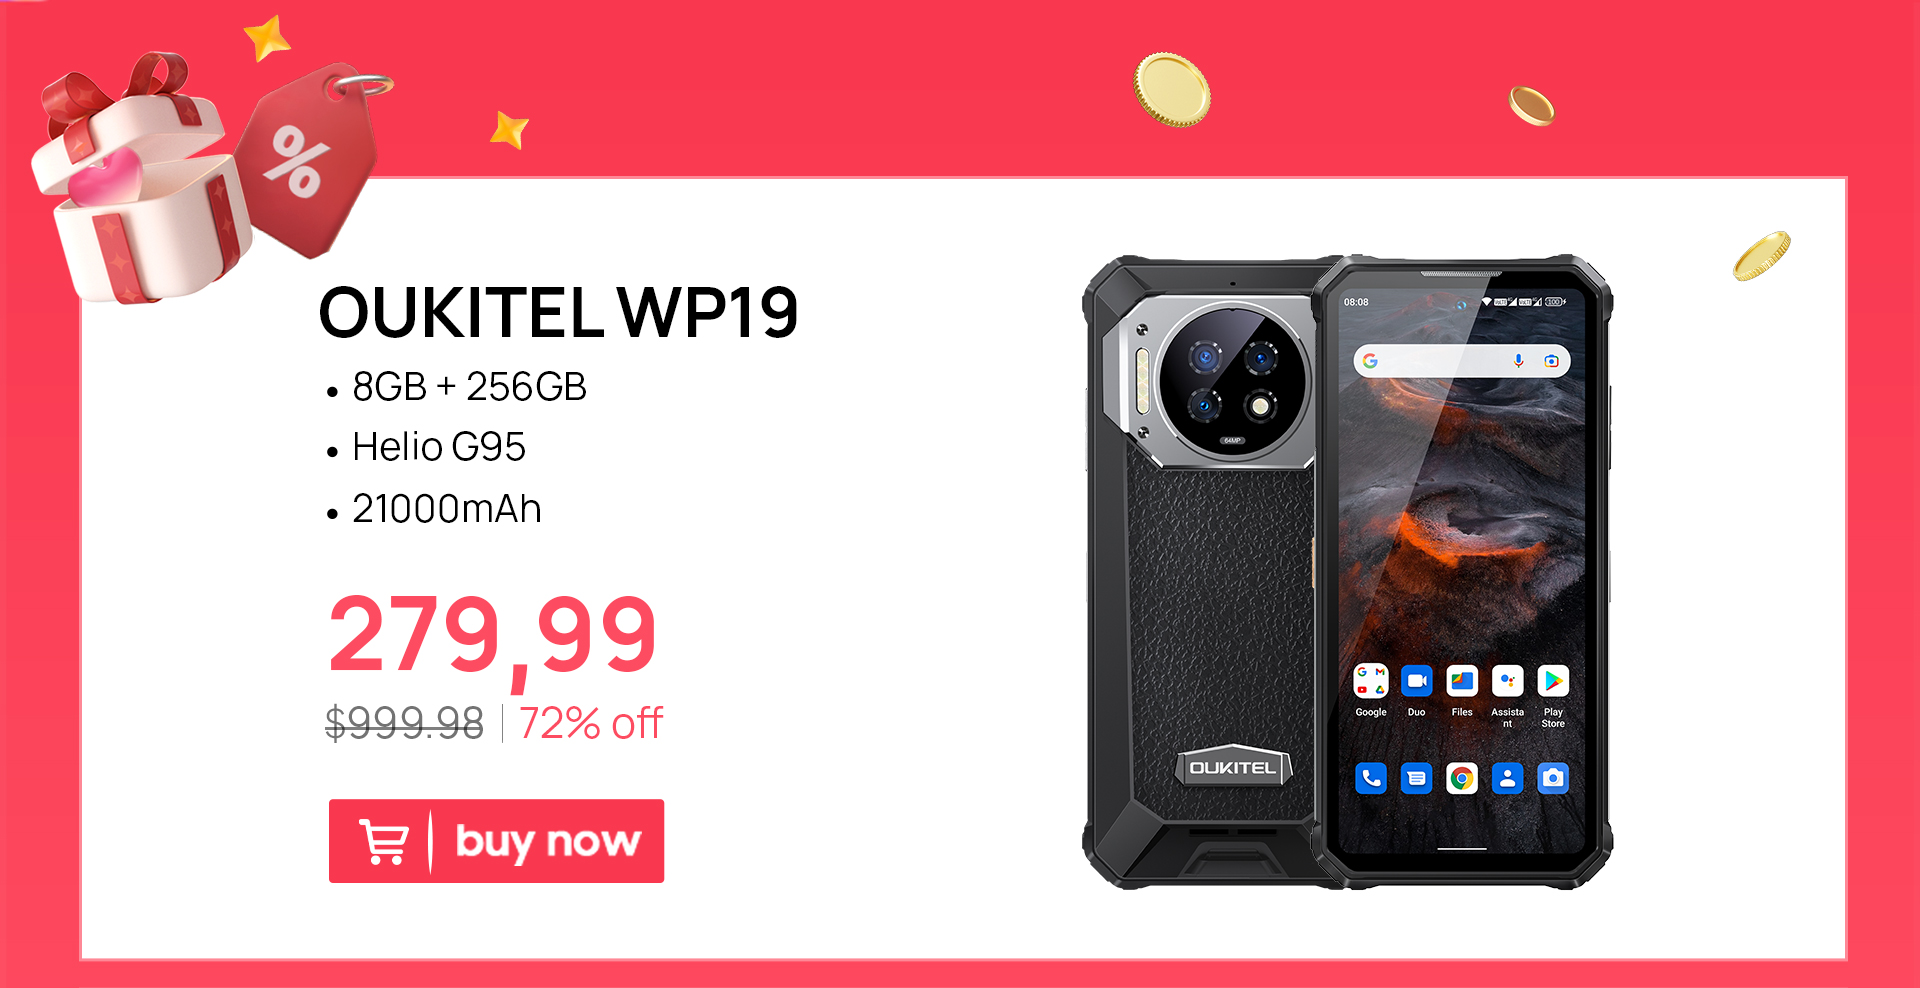 Oukitel WP30 Pro 120W 5G Rugged Smartphone android 13 12GB+512GB 11000 mAh  6.78 FHD+ Mobile Phone 108MP Cell Phone Global - AliExpress